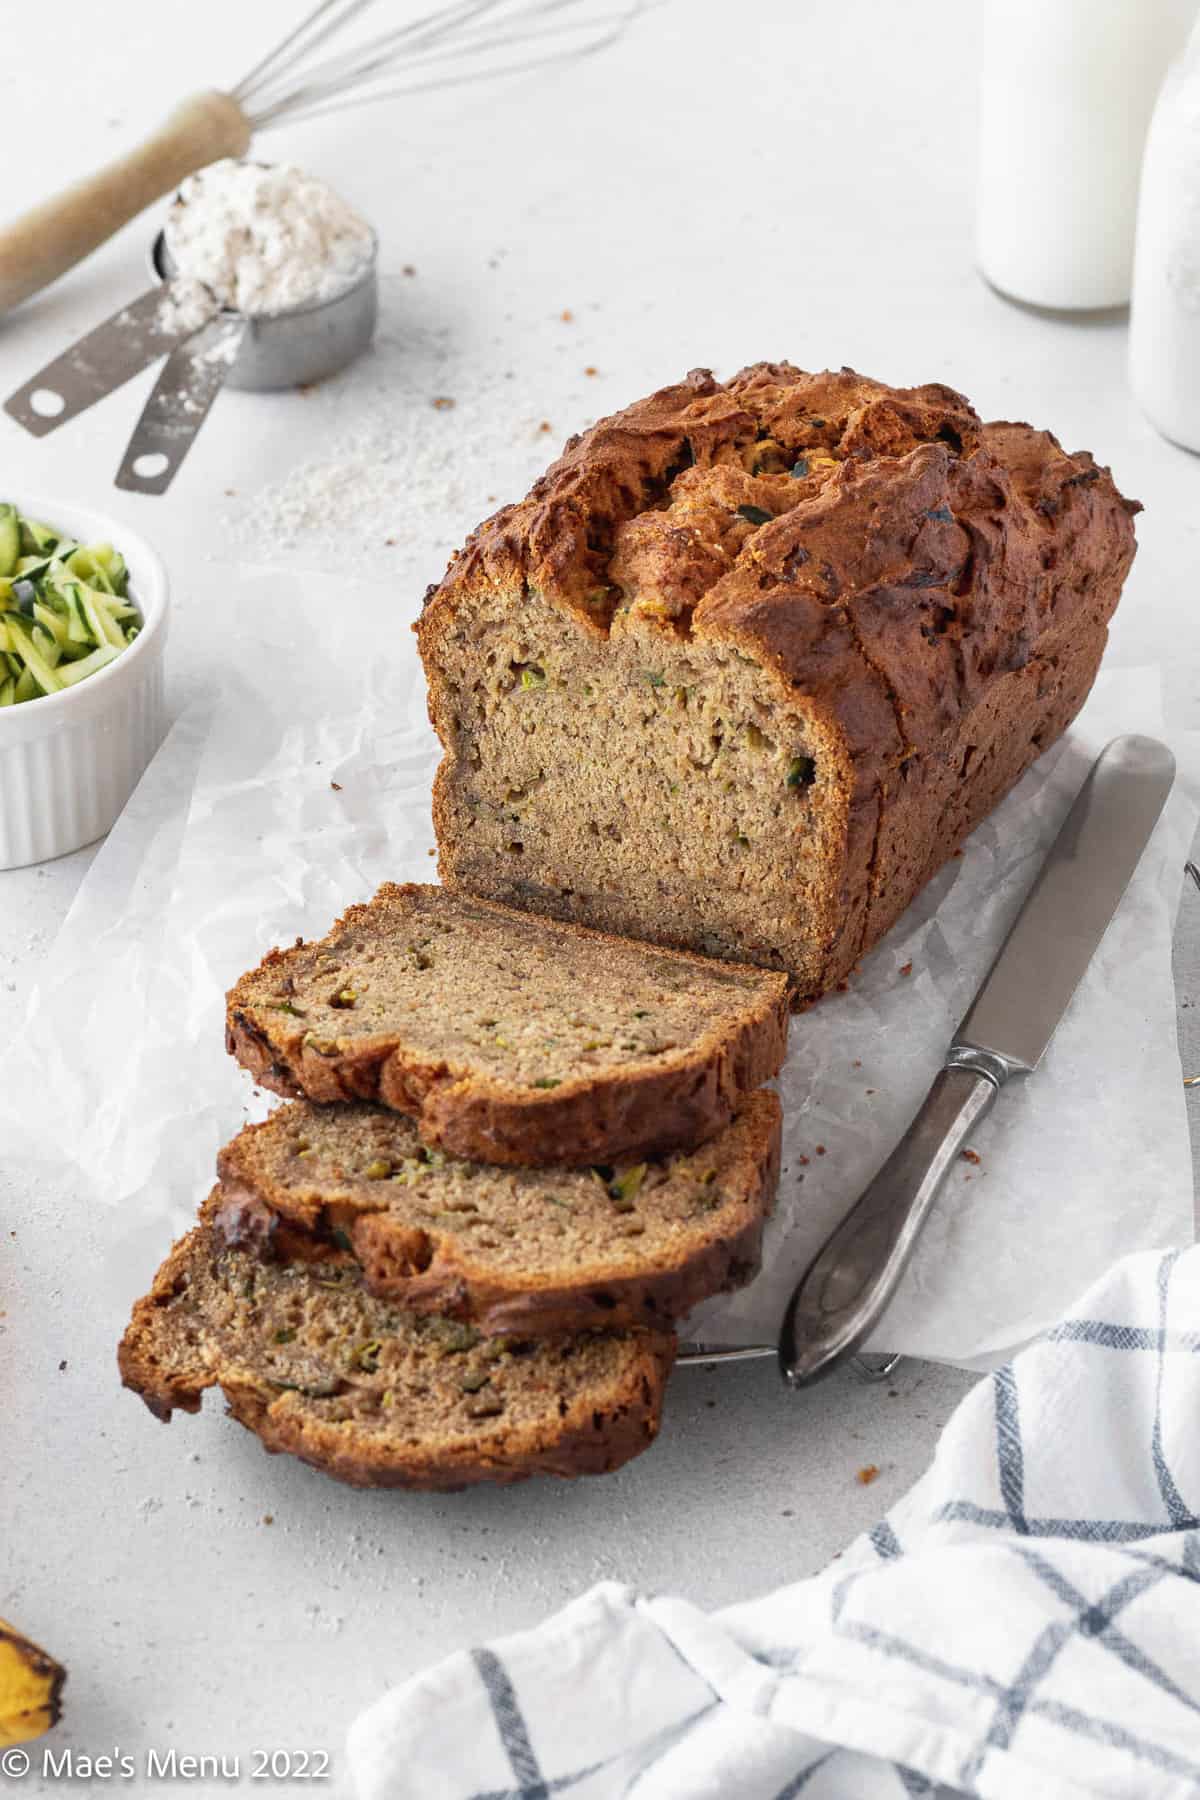 A partially sliced loaf of banana zucchini bread on a cooling rack with a knife.